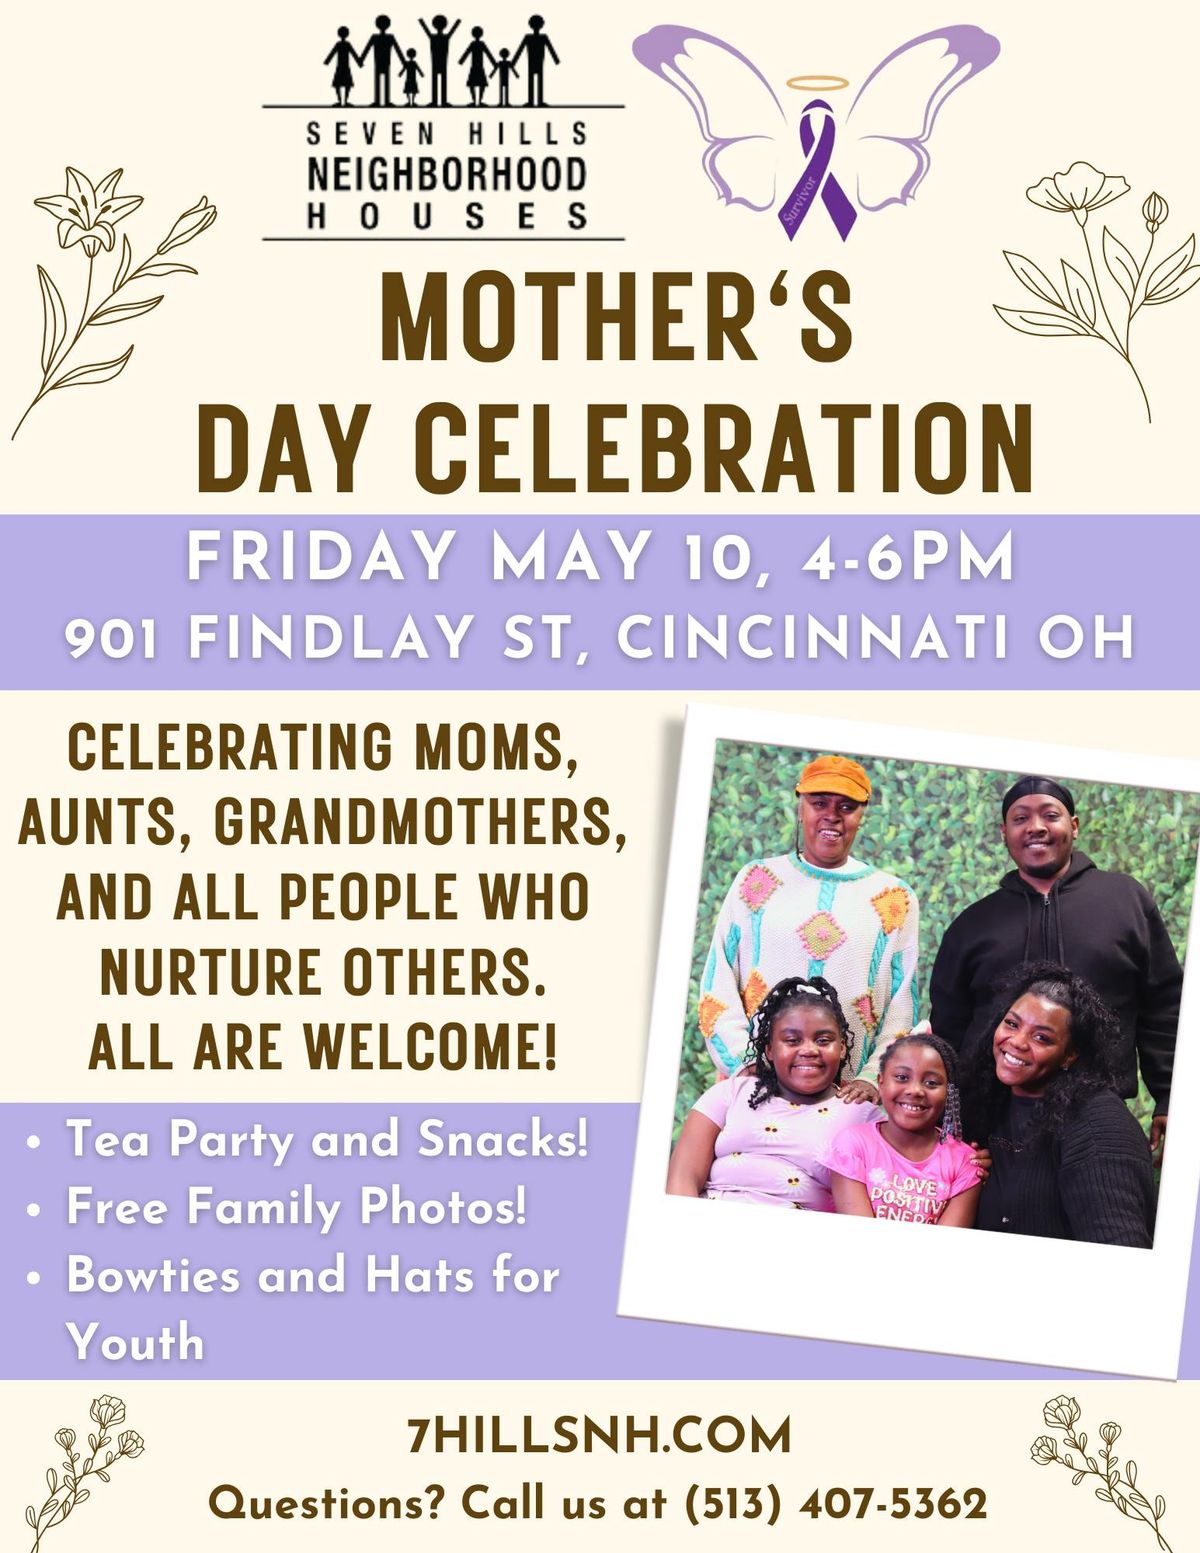 Mother's Day Celebration at the Neighborhood House!